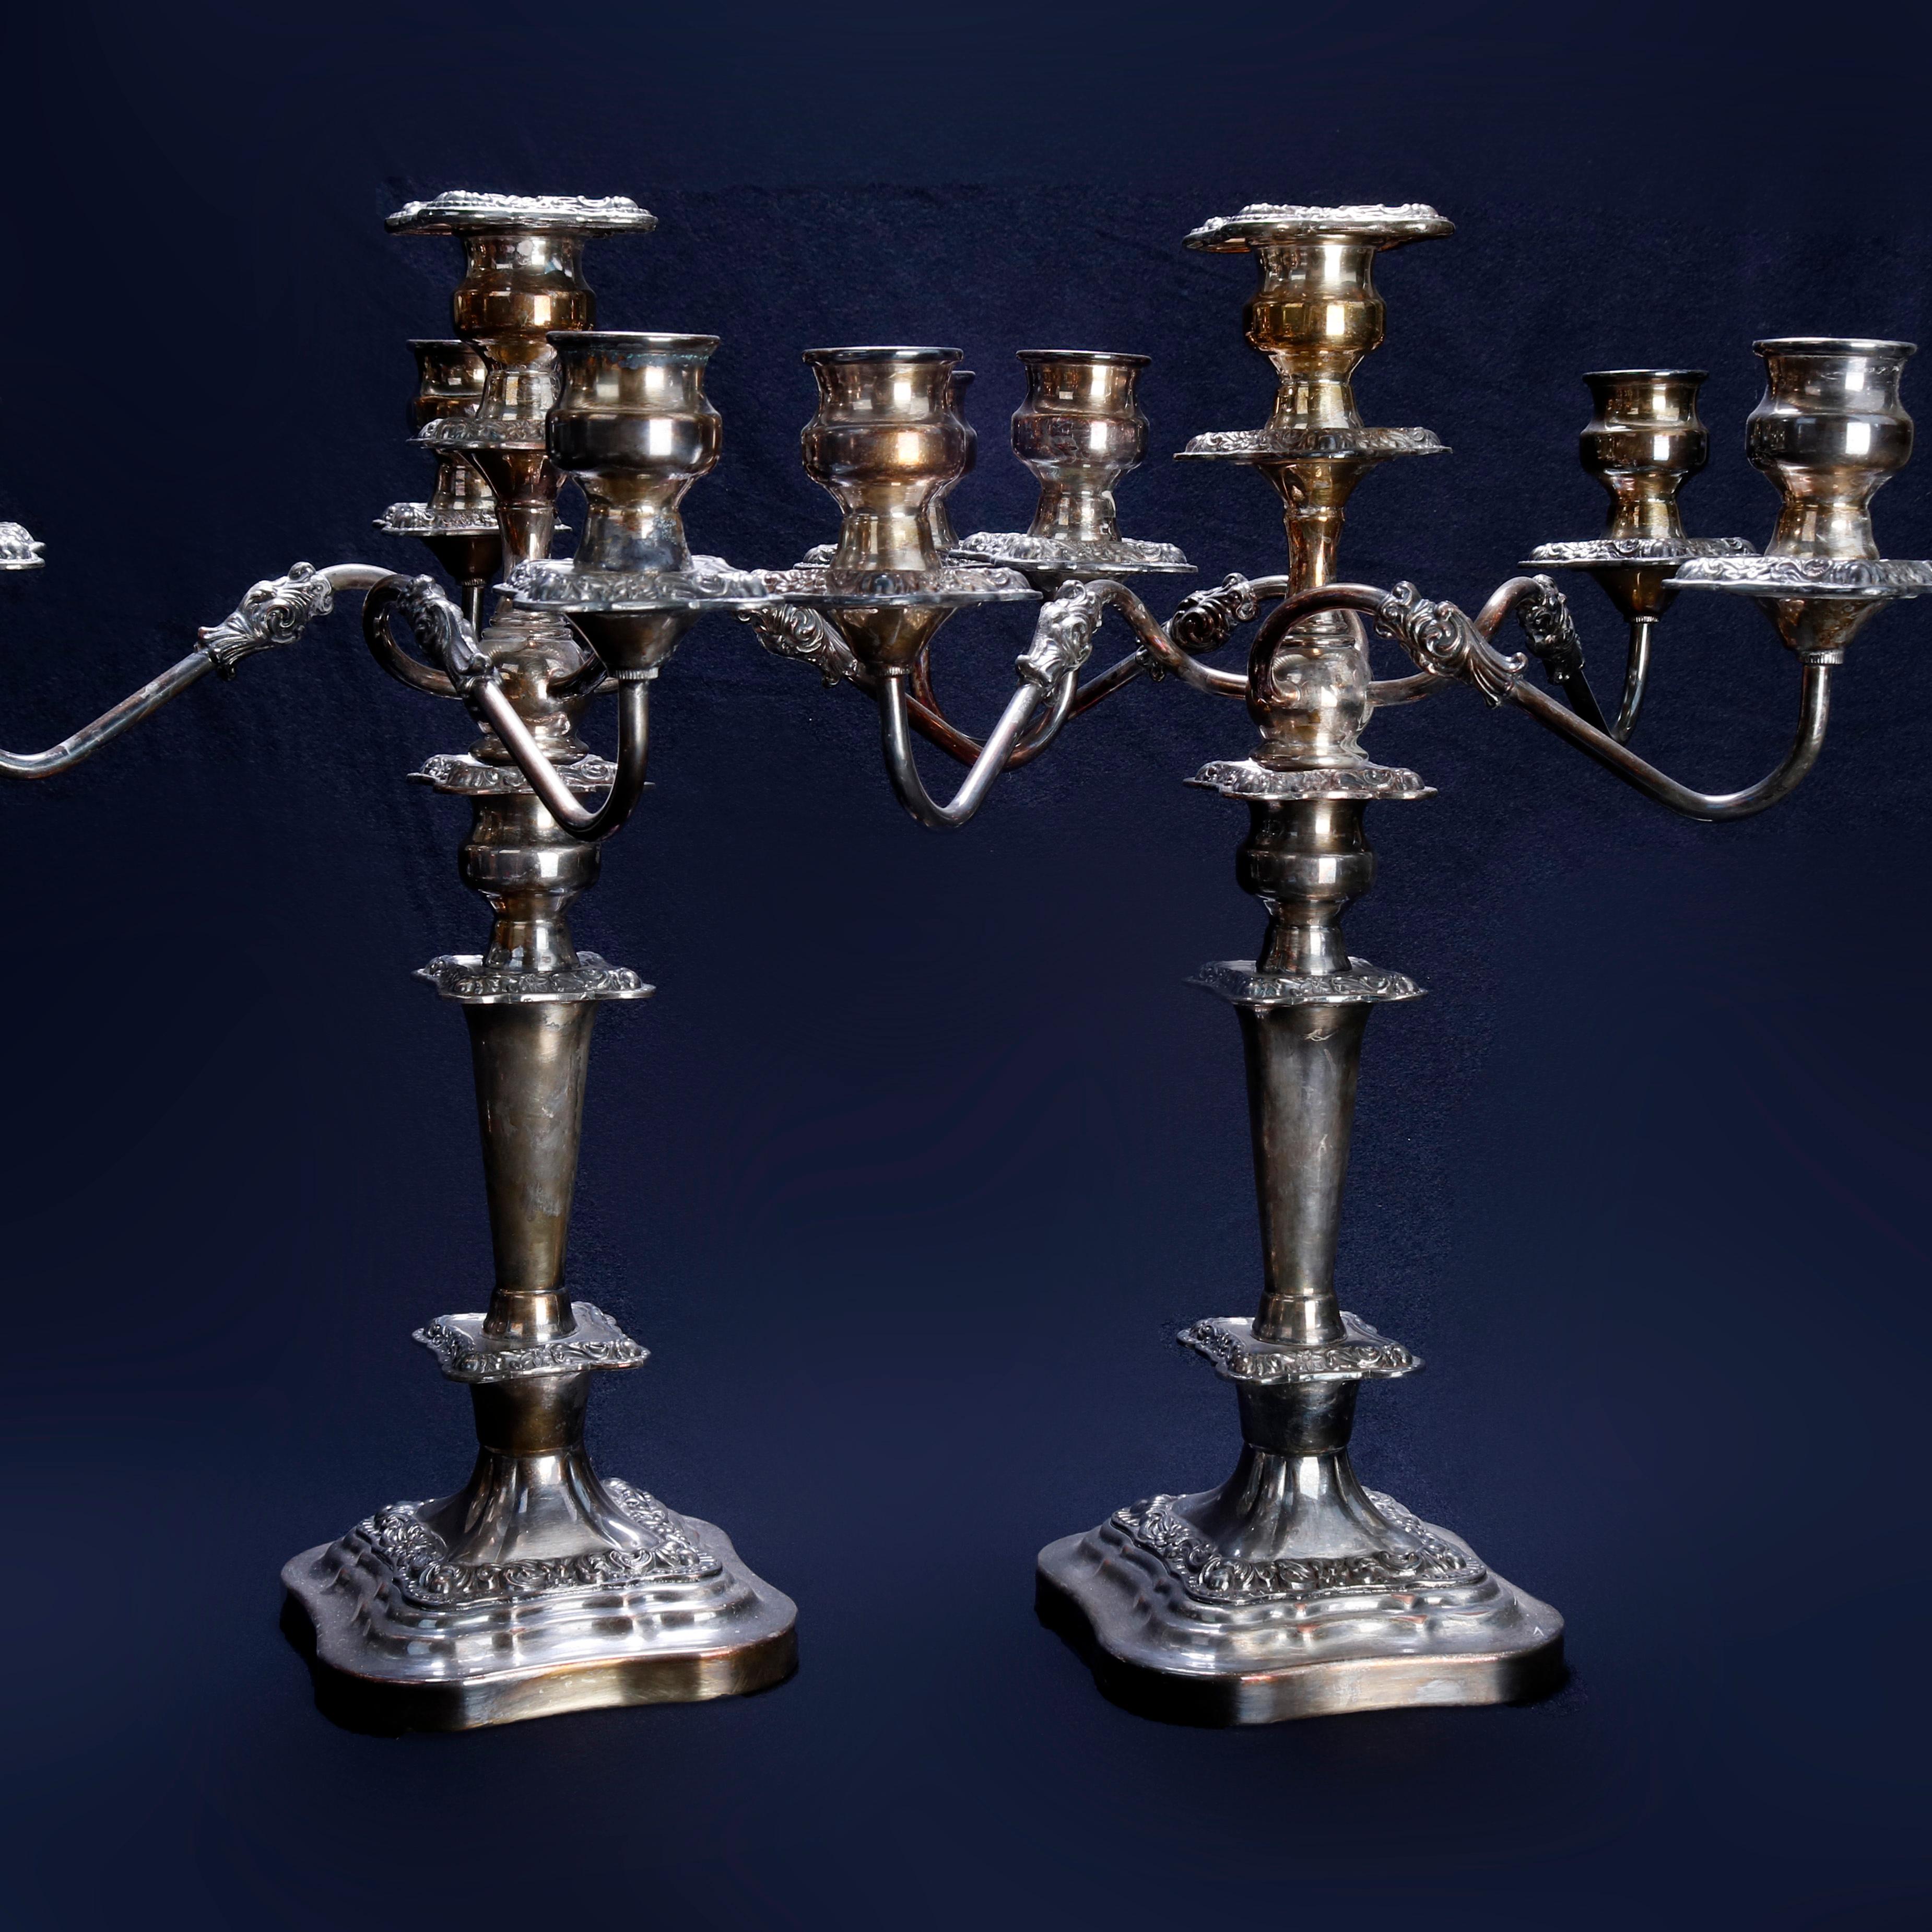 An antique pair of candelabra by Gorham offers silver plate balustrade construction with four scroll form arms surrounding central candle socket seated on shaped and stepped base with foliate decoration, circa 1920

Measures: 18